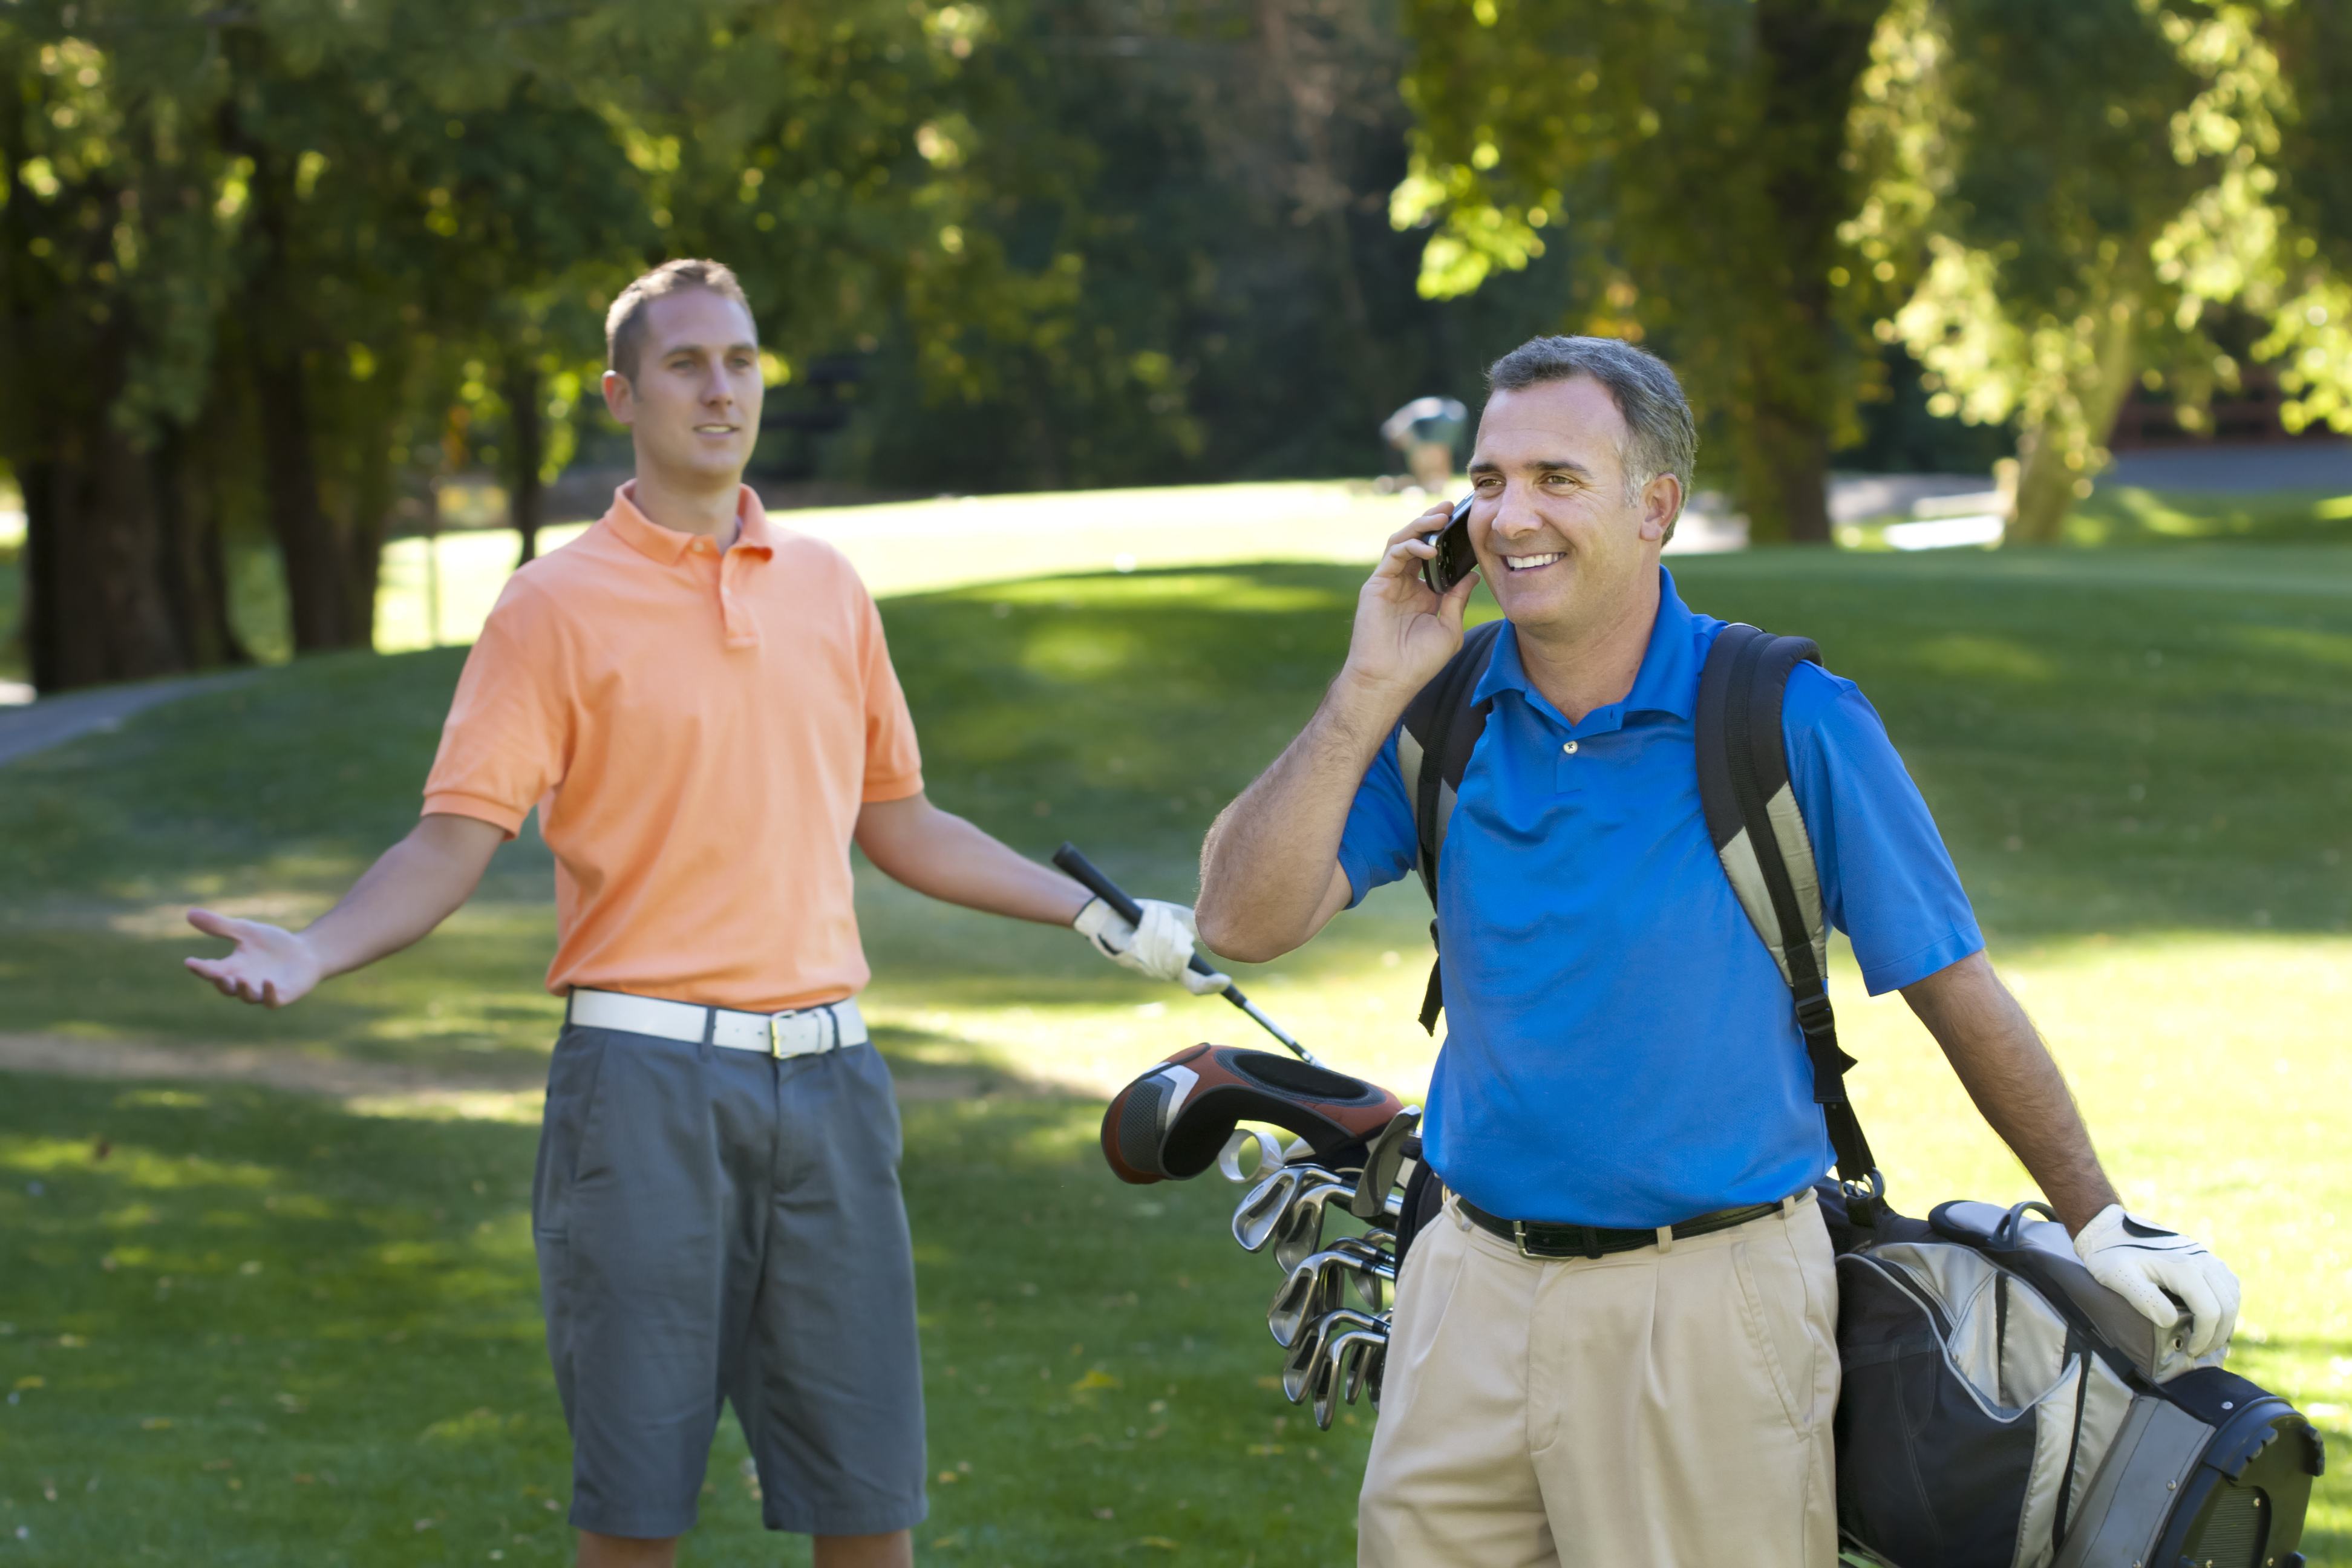 Five Do's and Don'ts For Golf Players Lighting Up on The Links